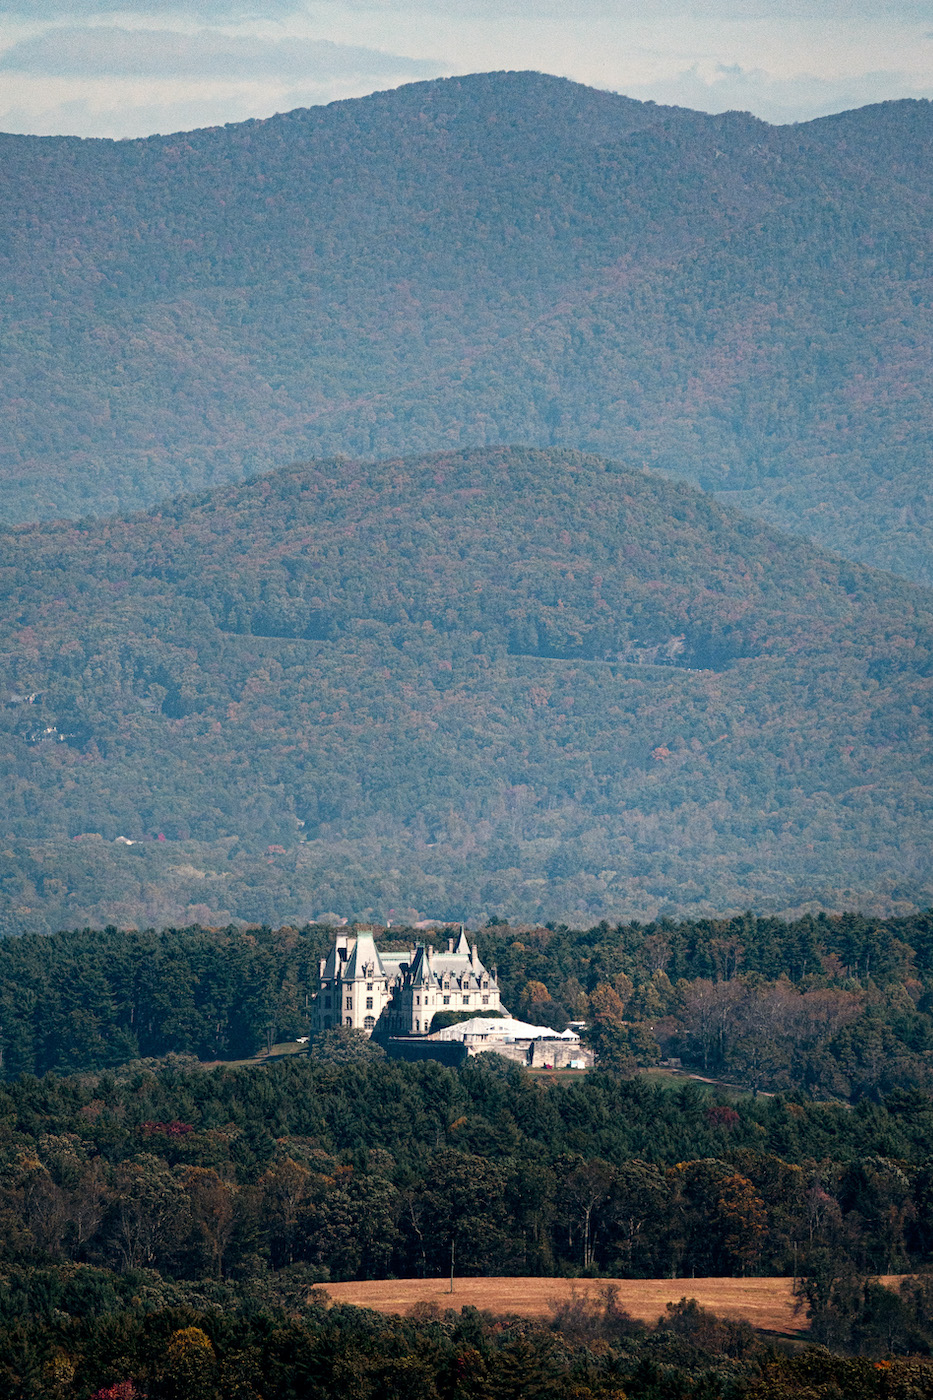 the Biltmore estate tucked in the woods is one of the most stunning historic homes in nc